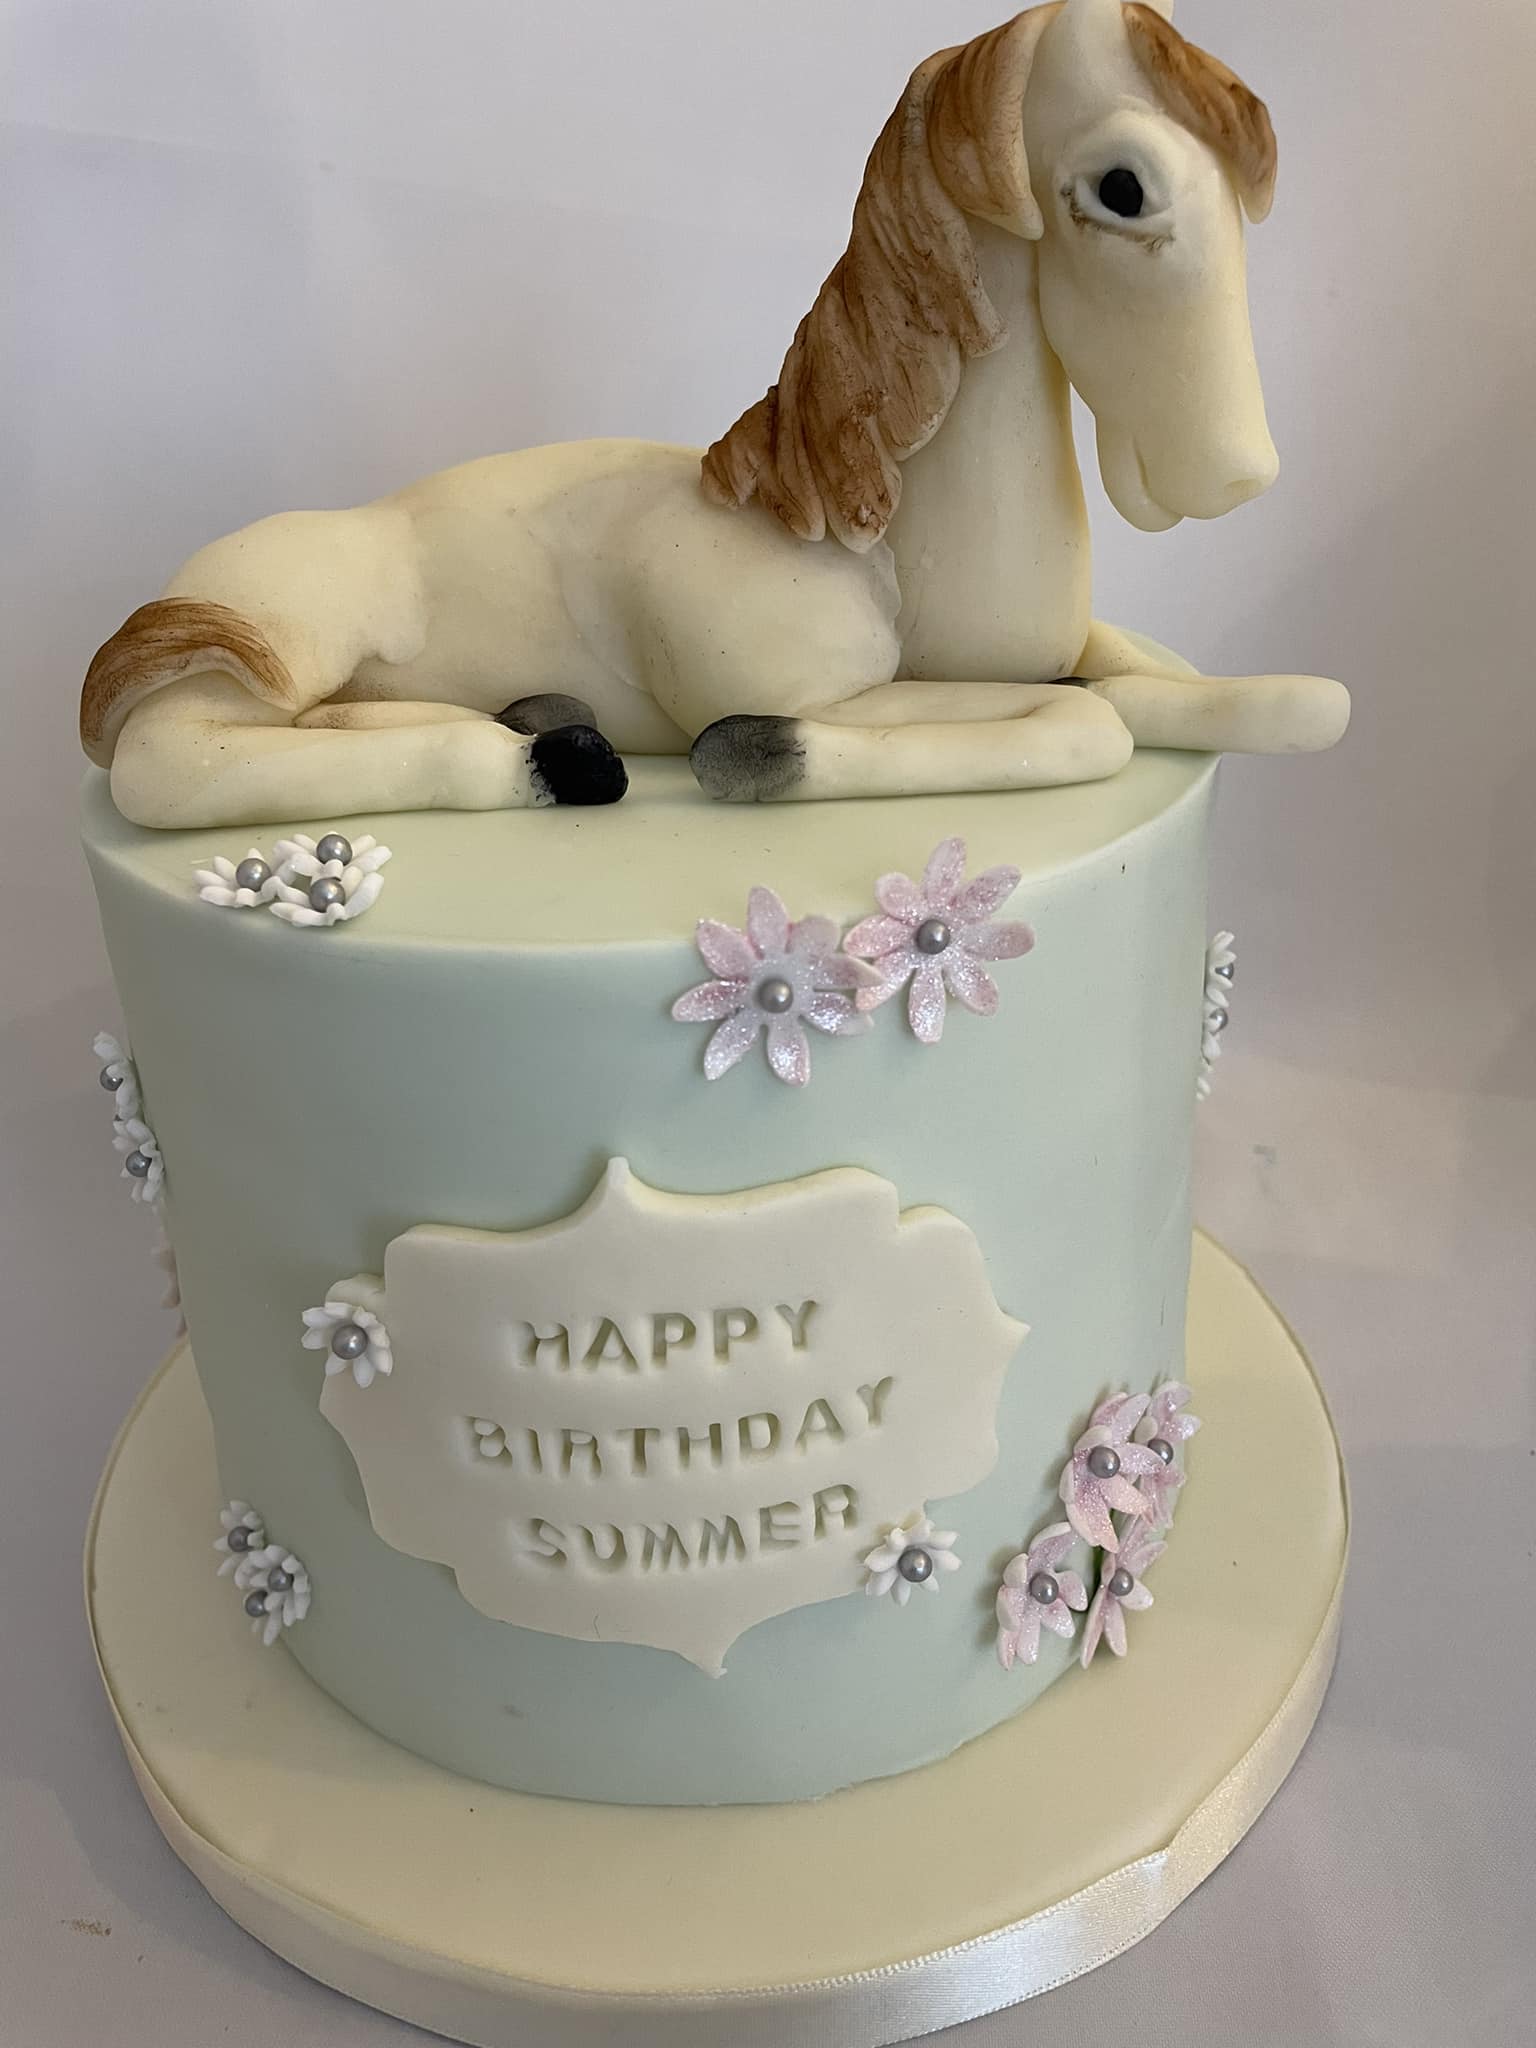 unicorn cake with sculpture of a unicorn on top 